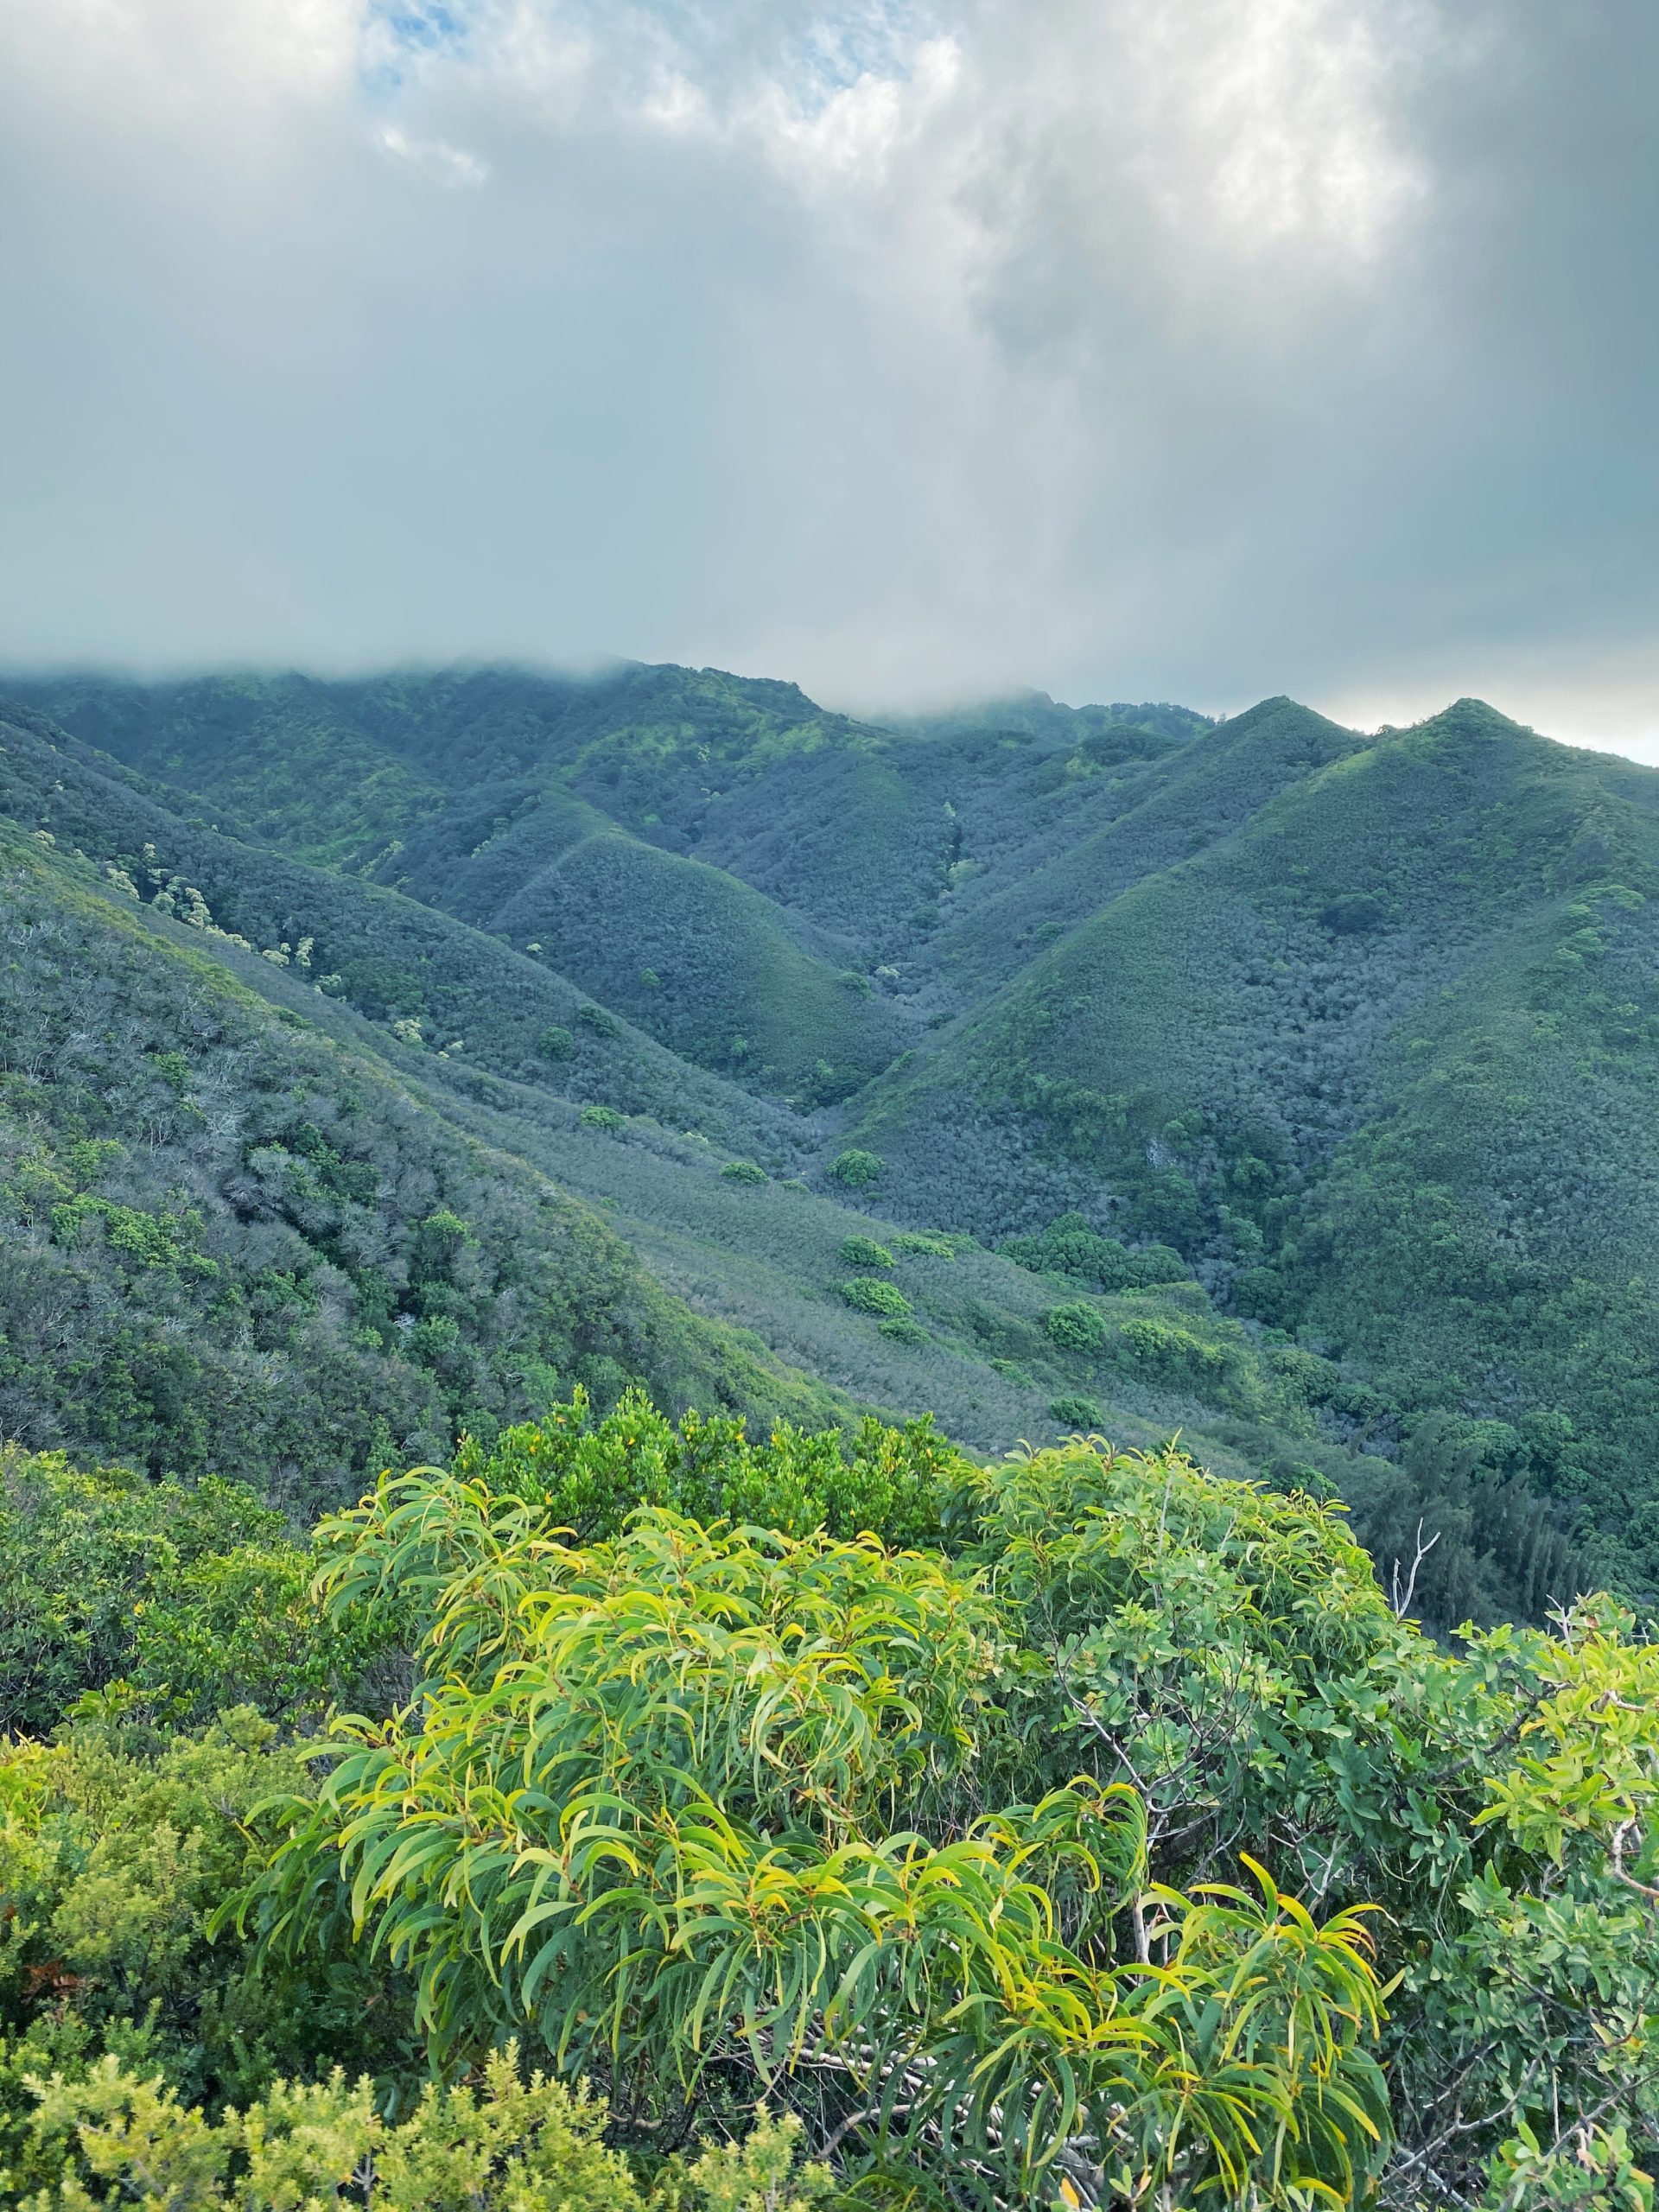 5 challenging hikes on Oahu